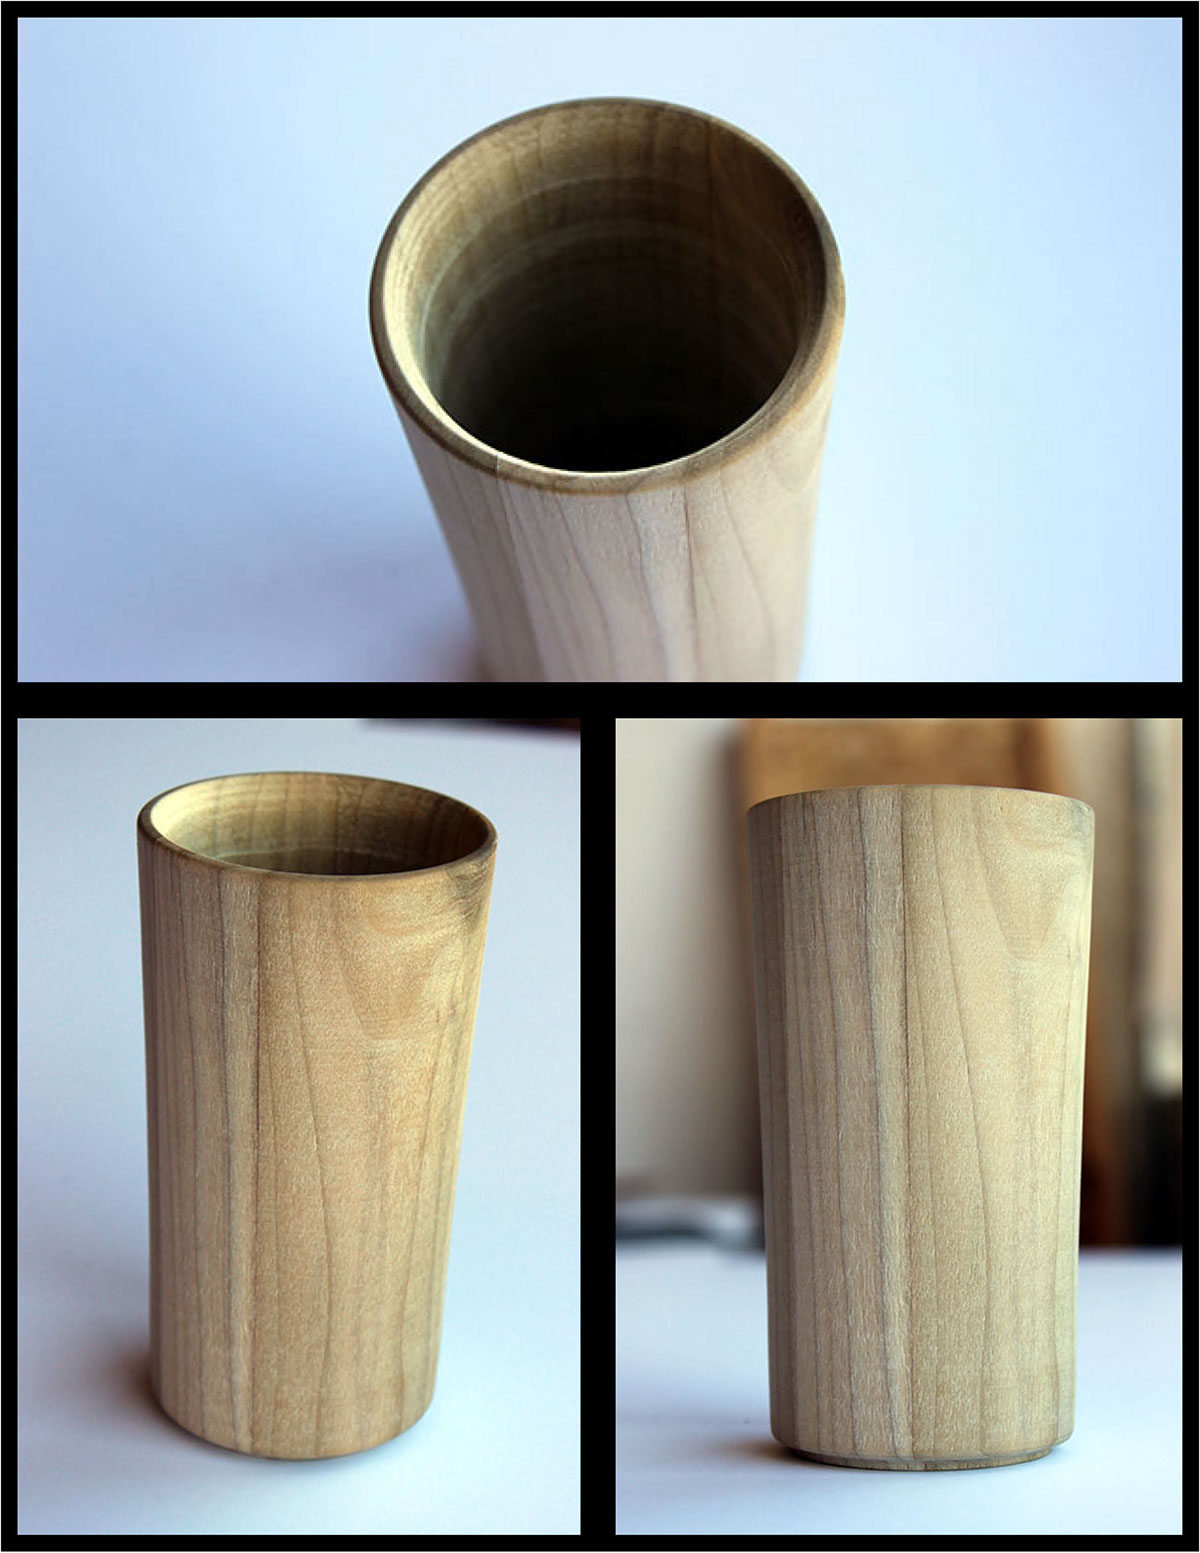 Wooden Cups wood working  wood turning cups tea cups plyboo Poplar basswood wood